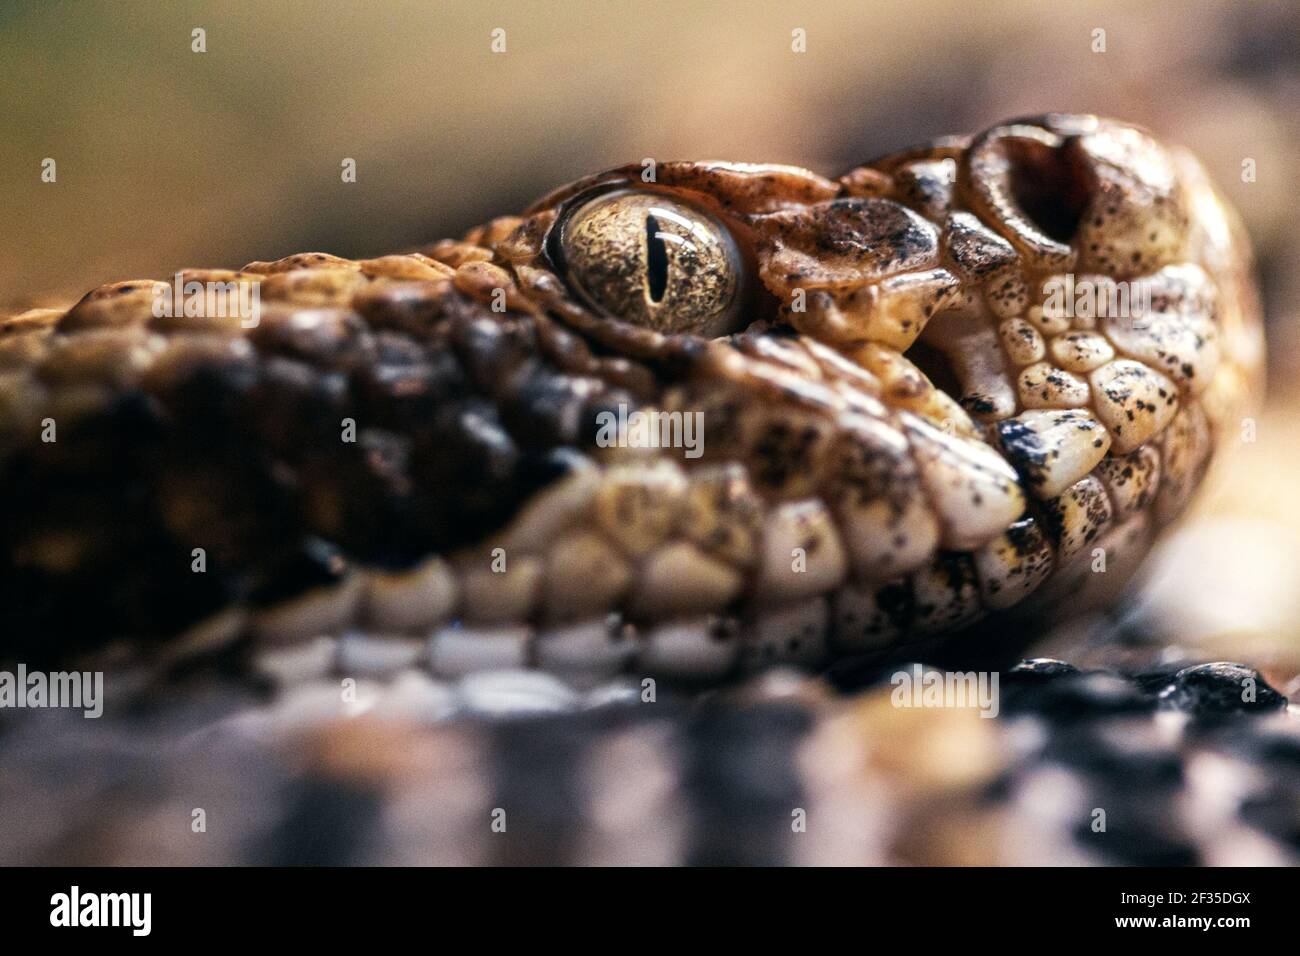 Close-up of a timber rattlesnake (Croatus horridus) in profile, at the WNC Nature Center in Asheville, North Carolina, USA Stock Photo